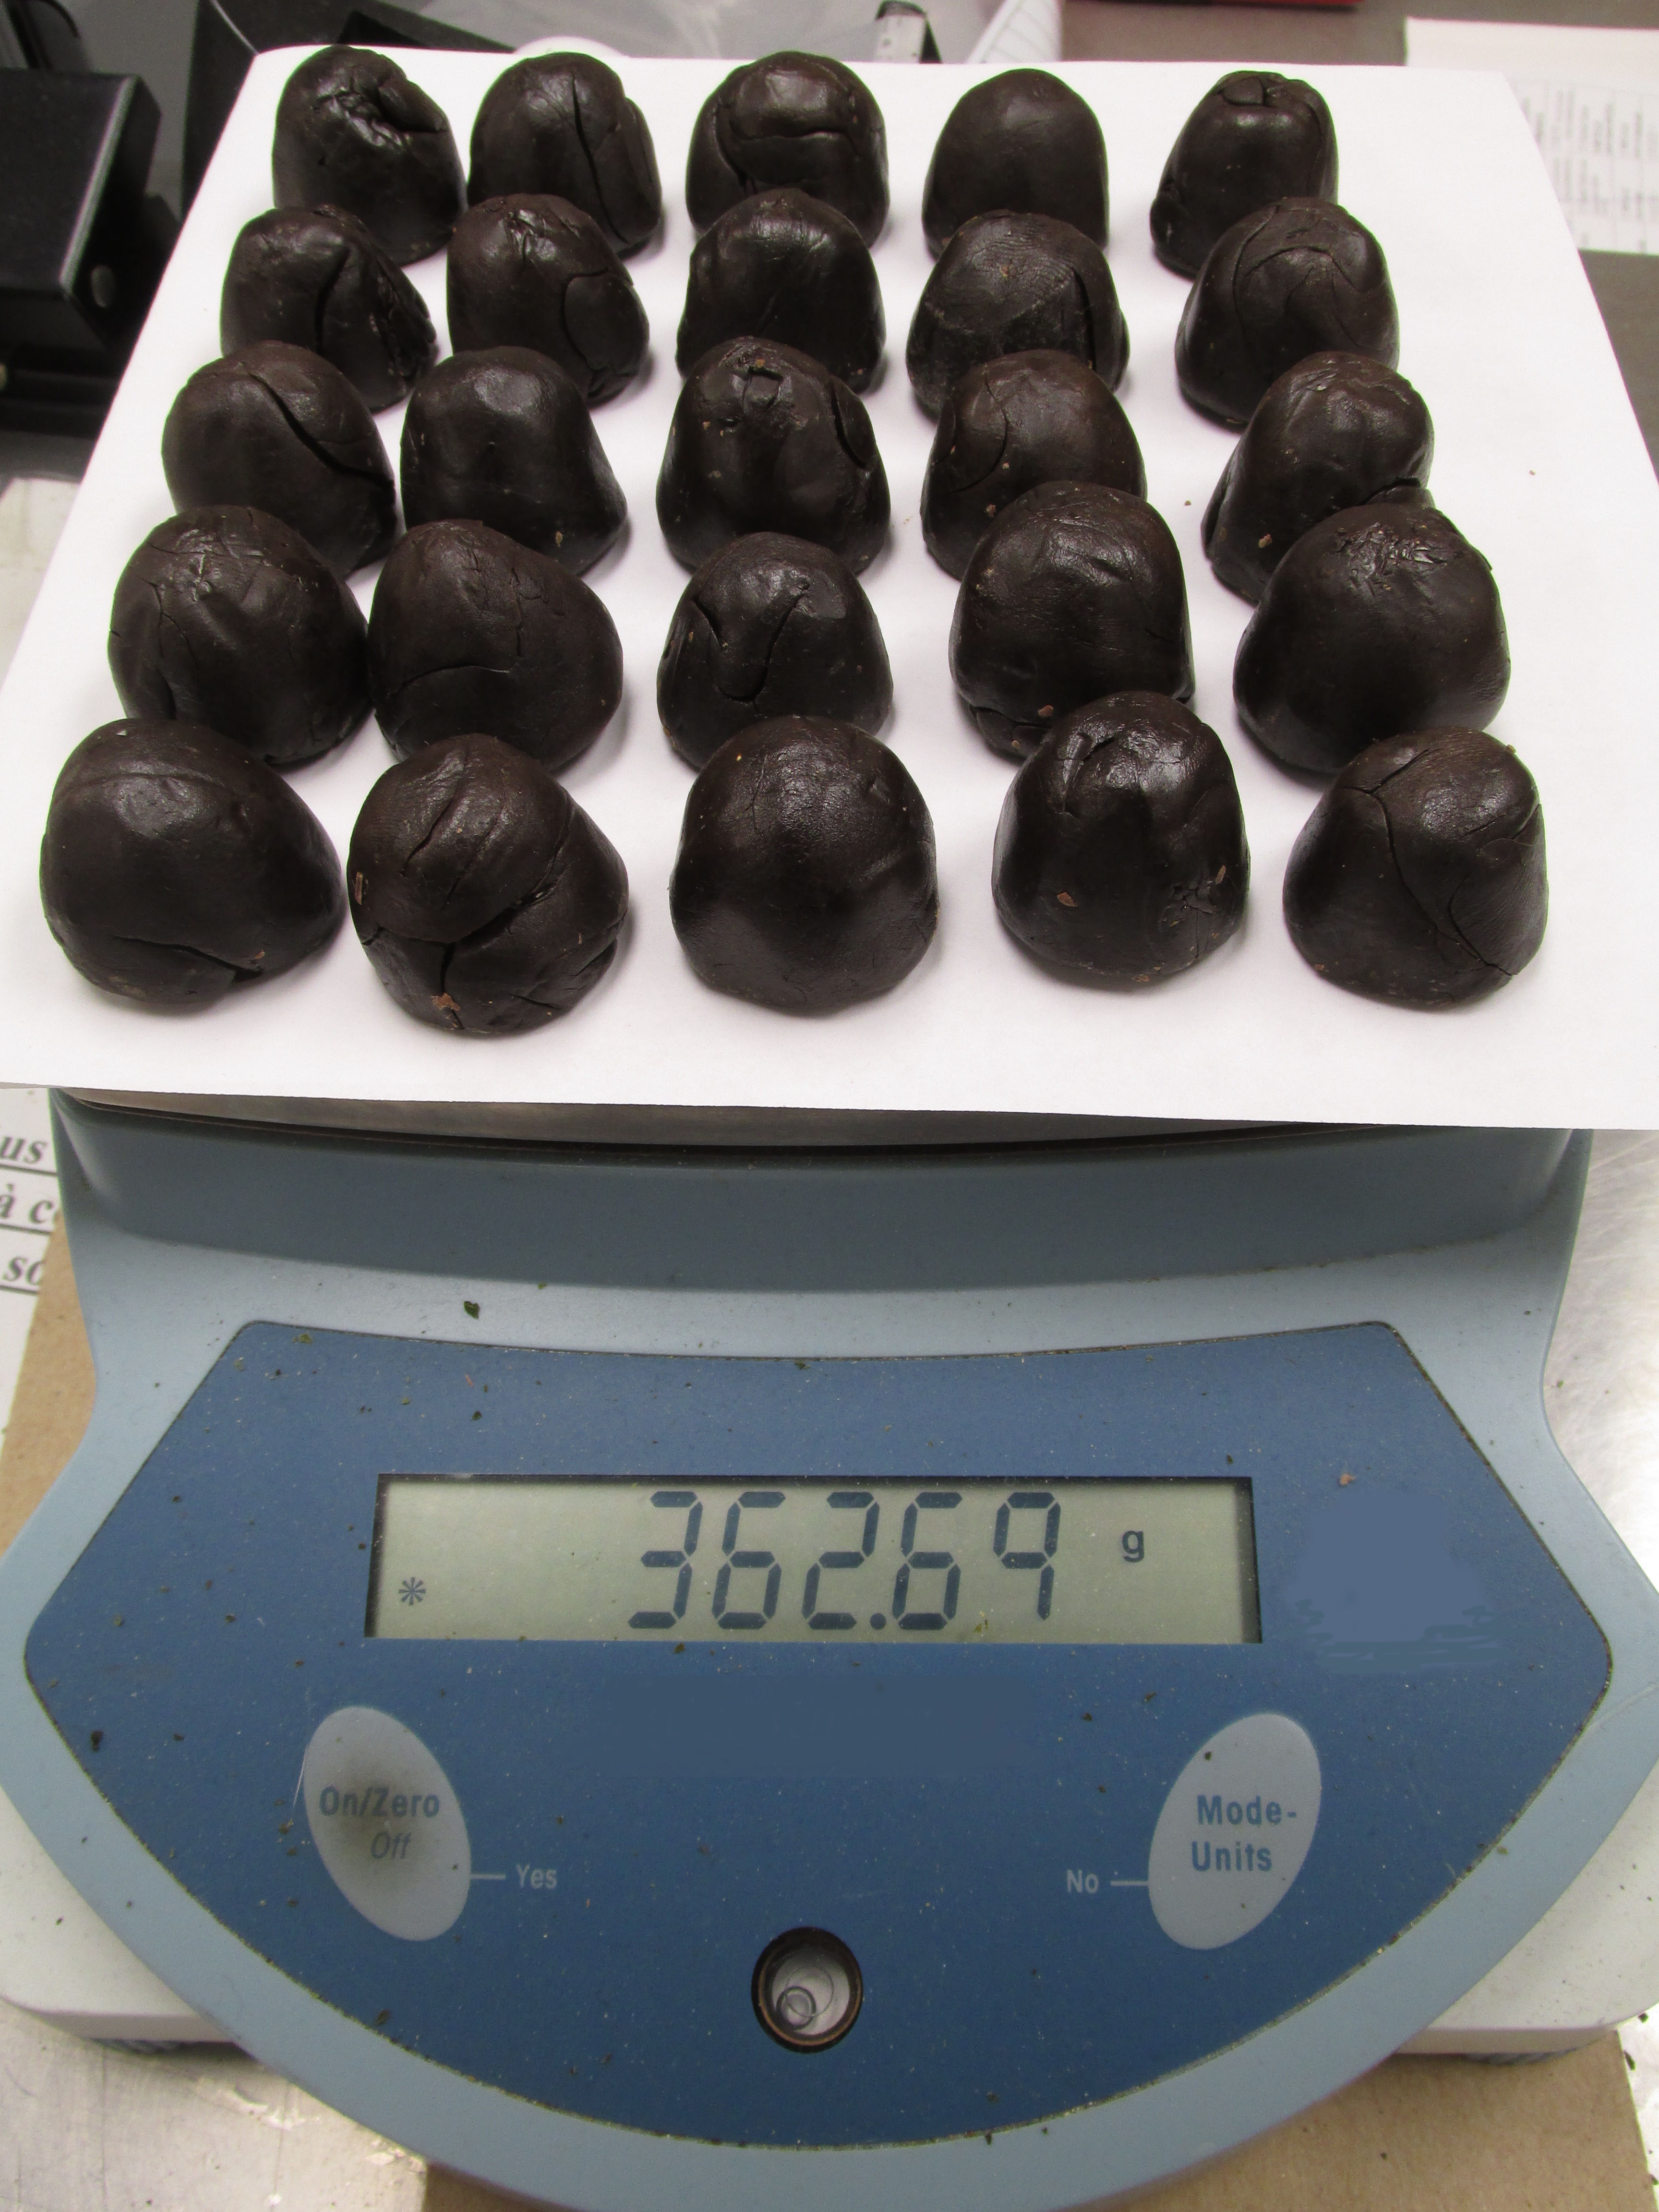 362 grams of suspected opium from Turkey that appeared to be pieces of chocolate were intercepted